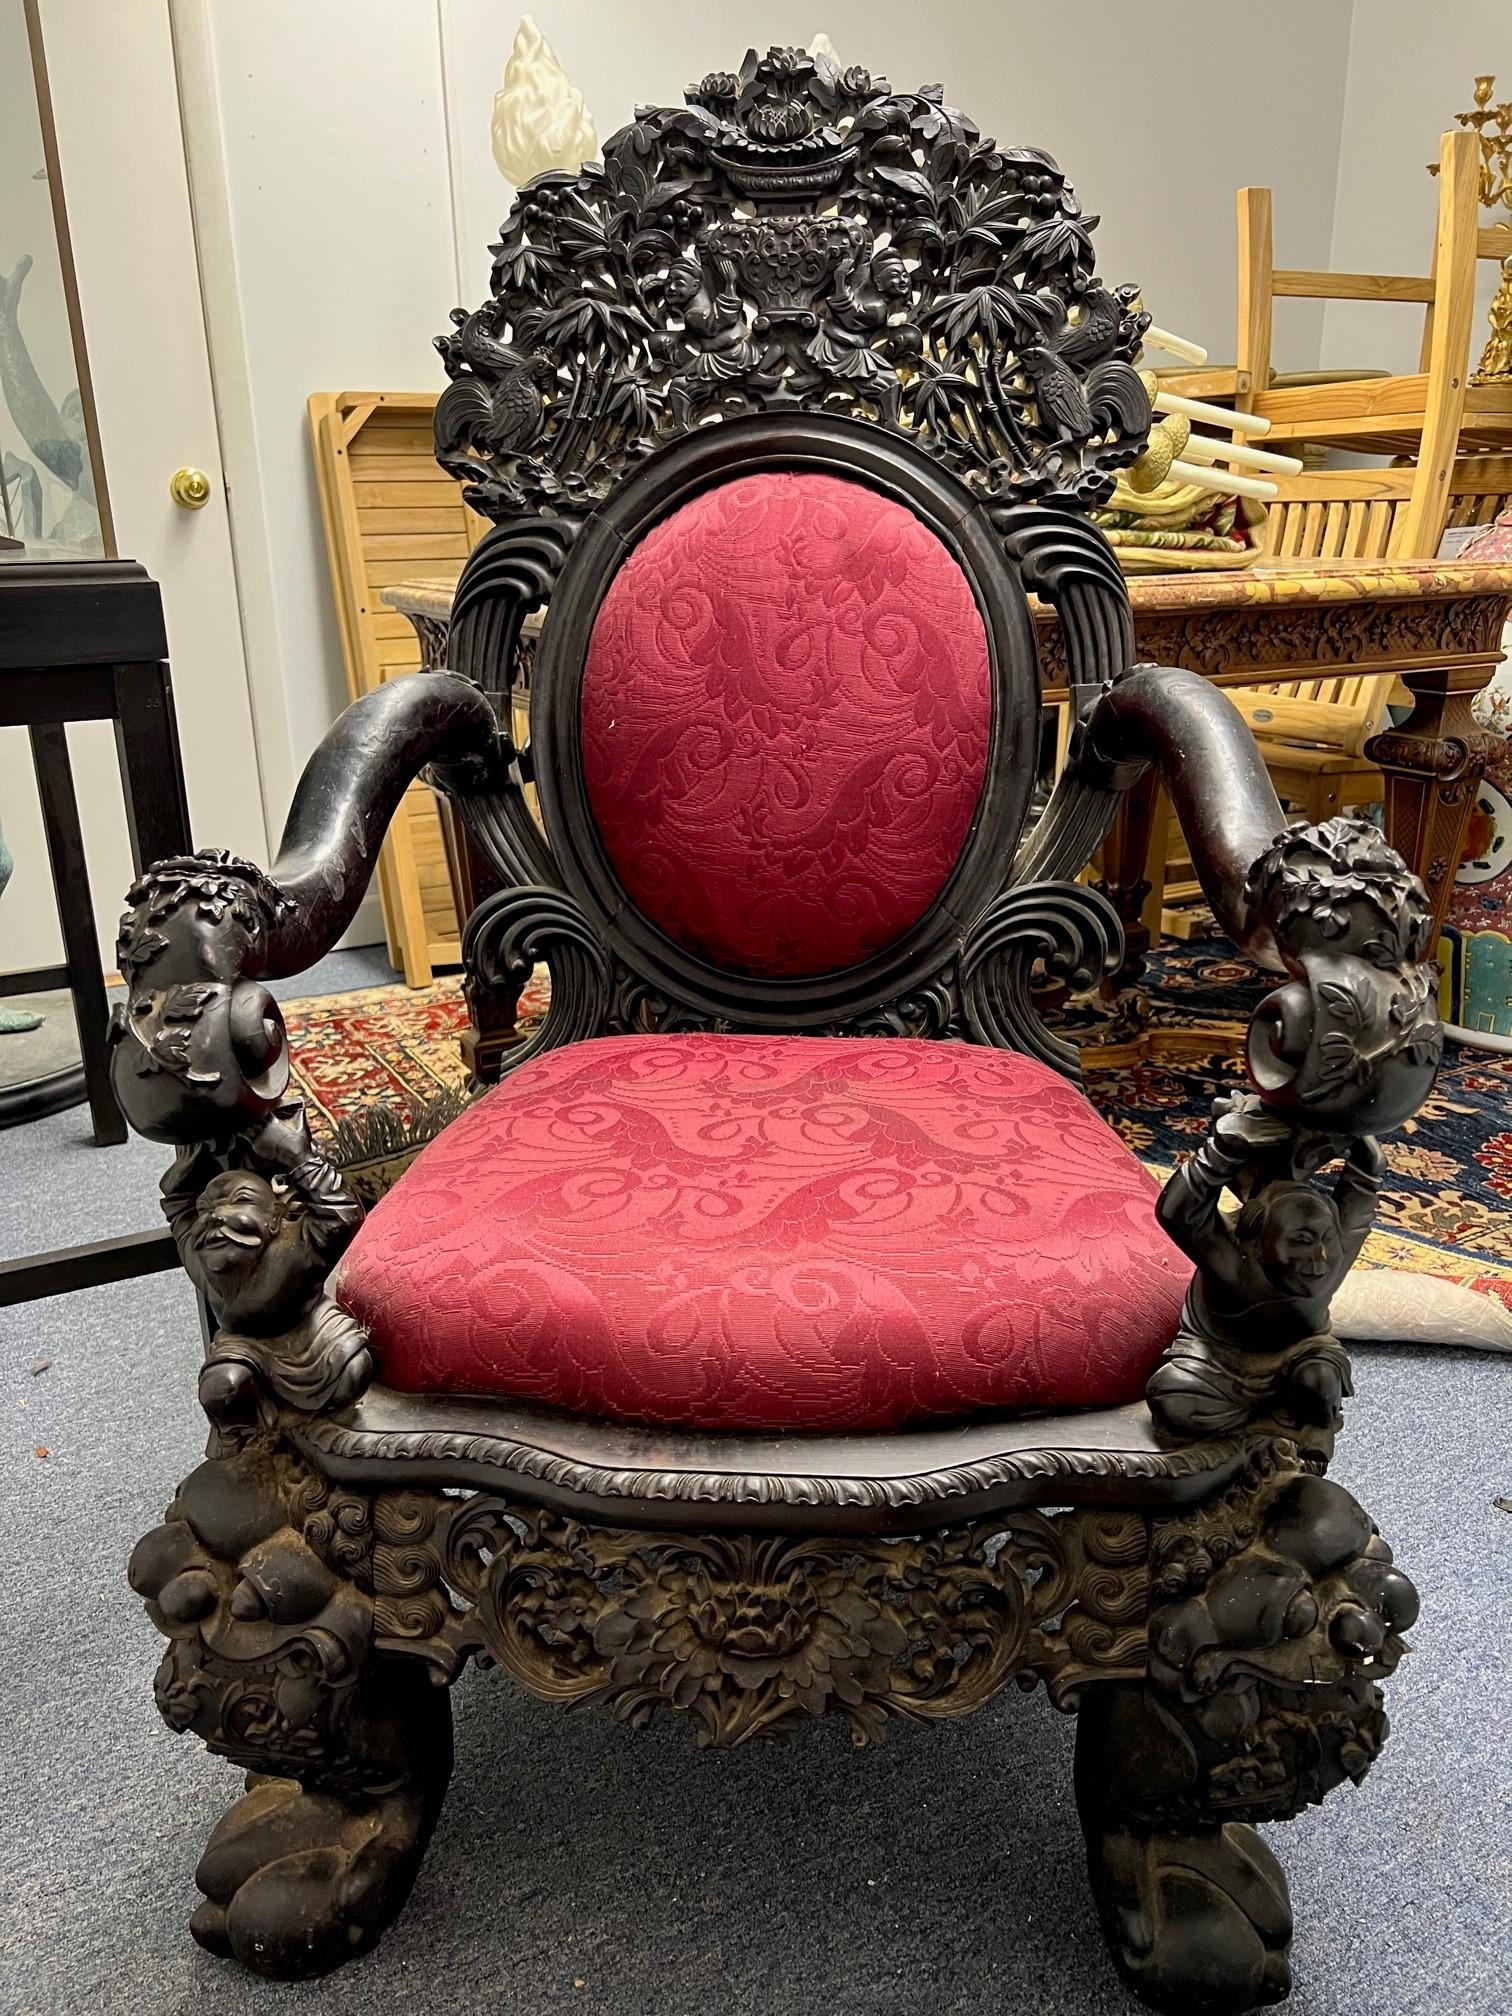 Late 19th century antique very decorative carved throne chair with amazing details. This antique  carved throne chair is full of carvings with Asian men, bamboo trees, flowers, roosters and other birds. The carvings are in good condition but the